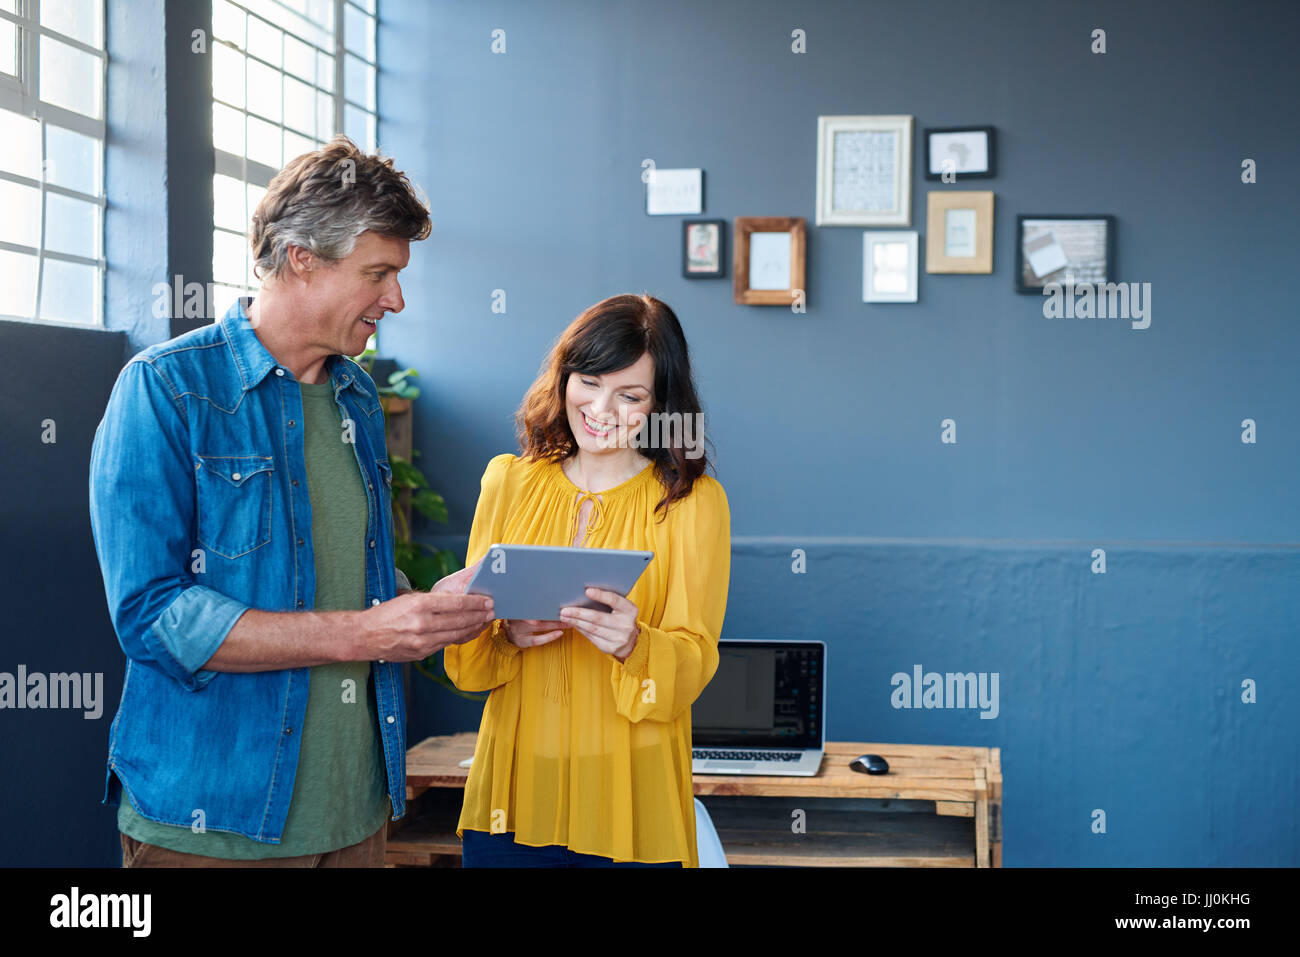 Smiling colleagues talking together over a tablet in an office Stock Photo